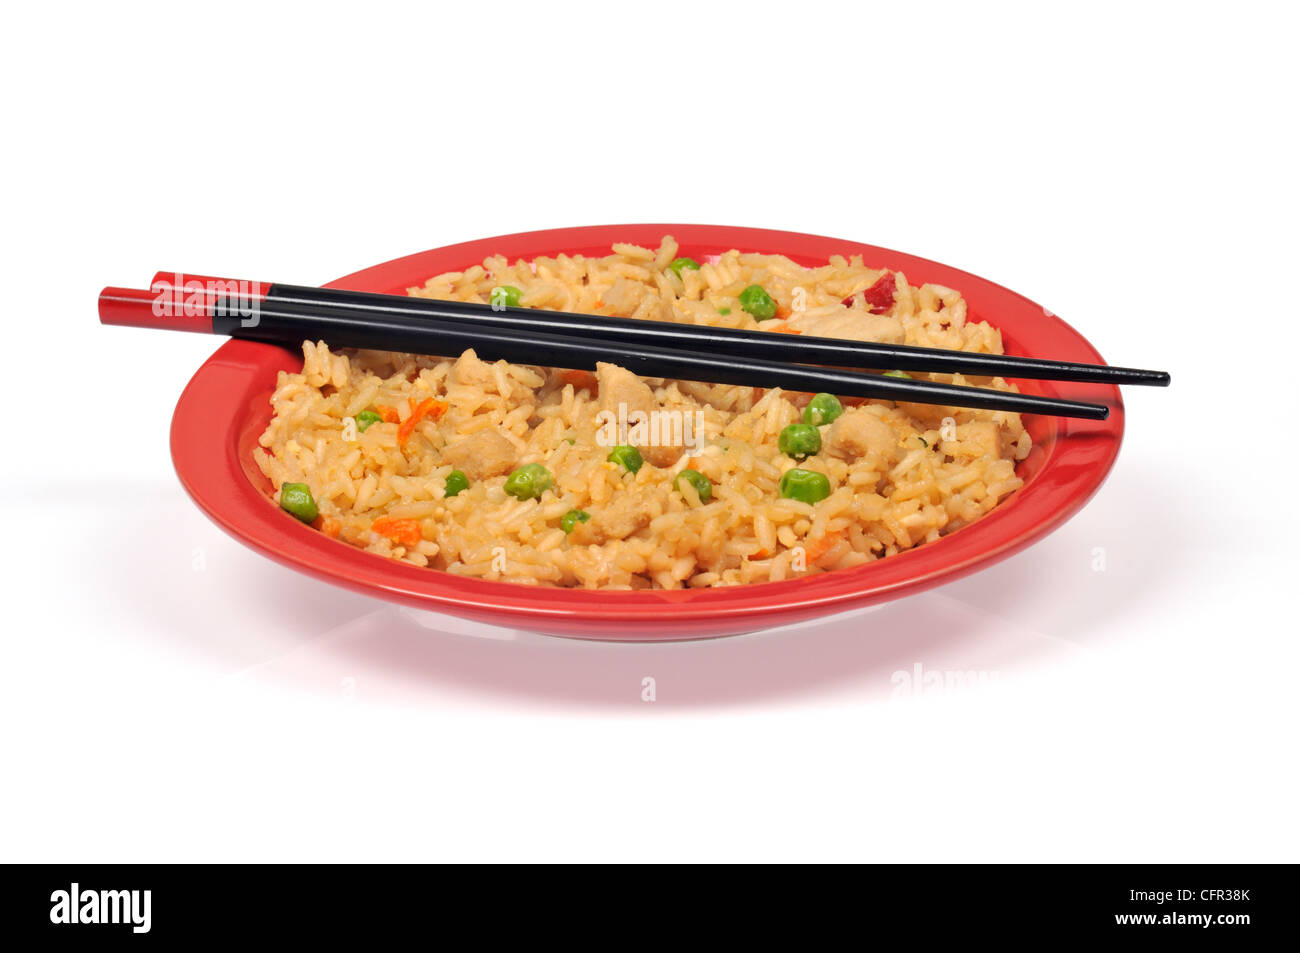 Oriental chicken fried rice with vegetables and chopsticks isolated on red plate Stock Photo